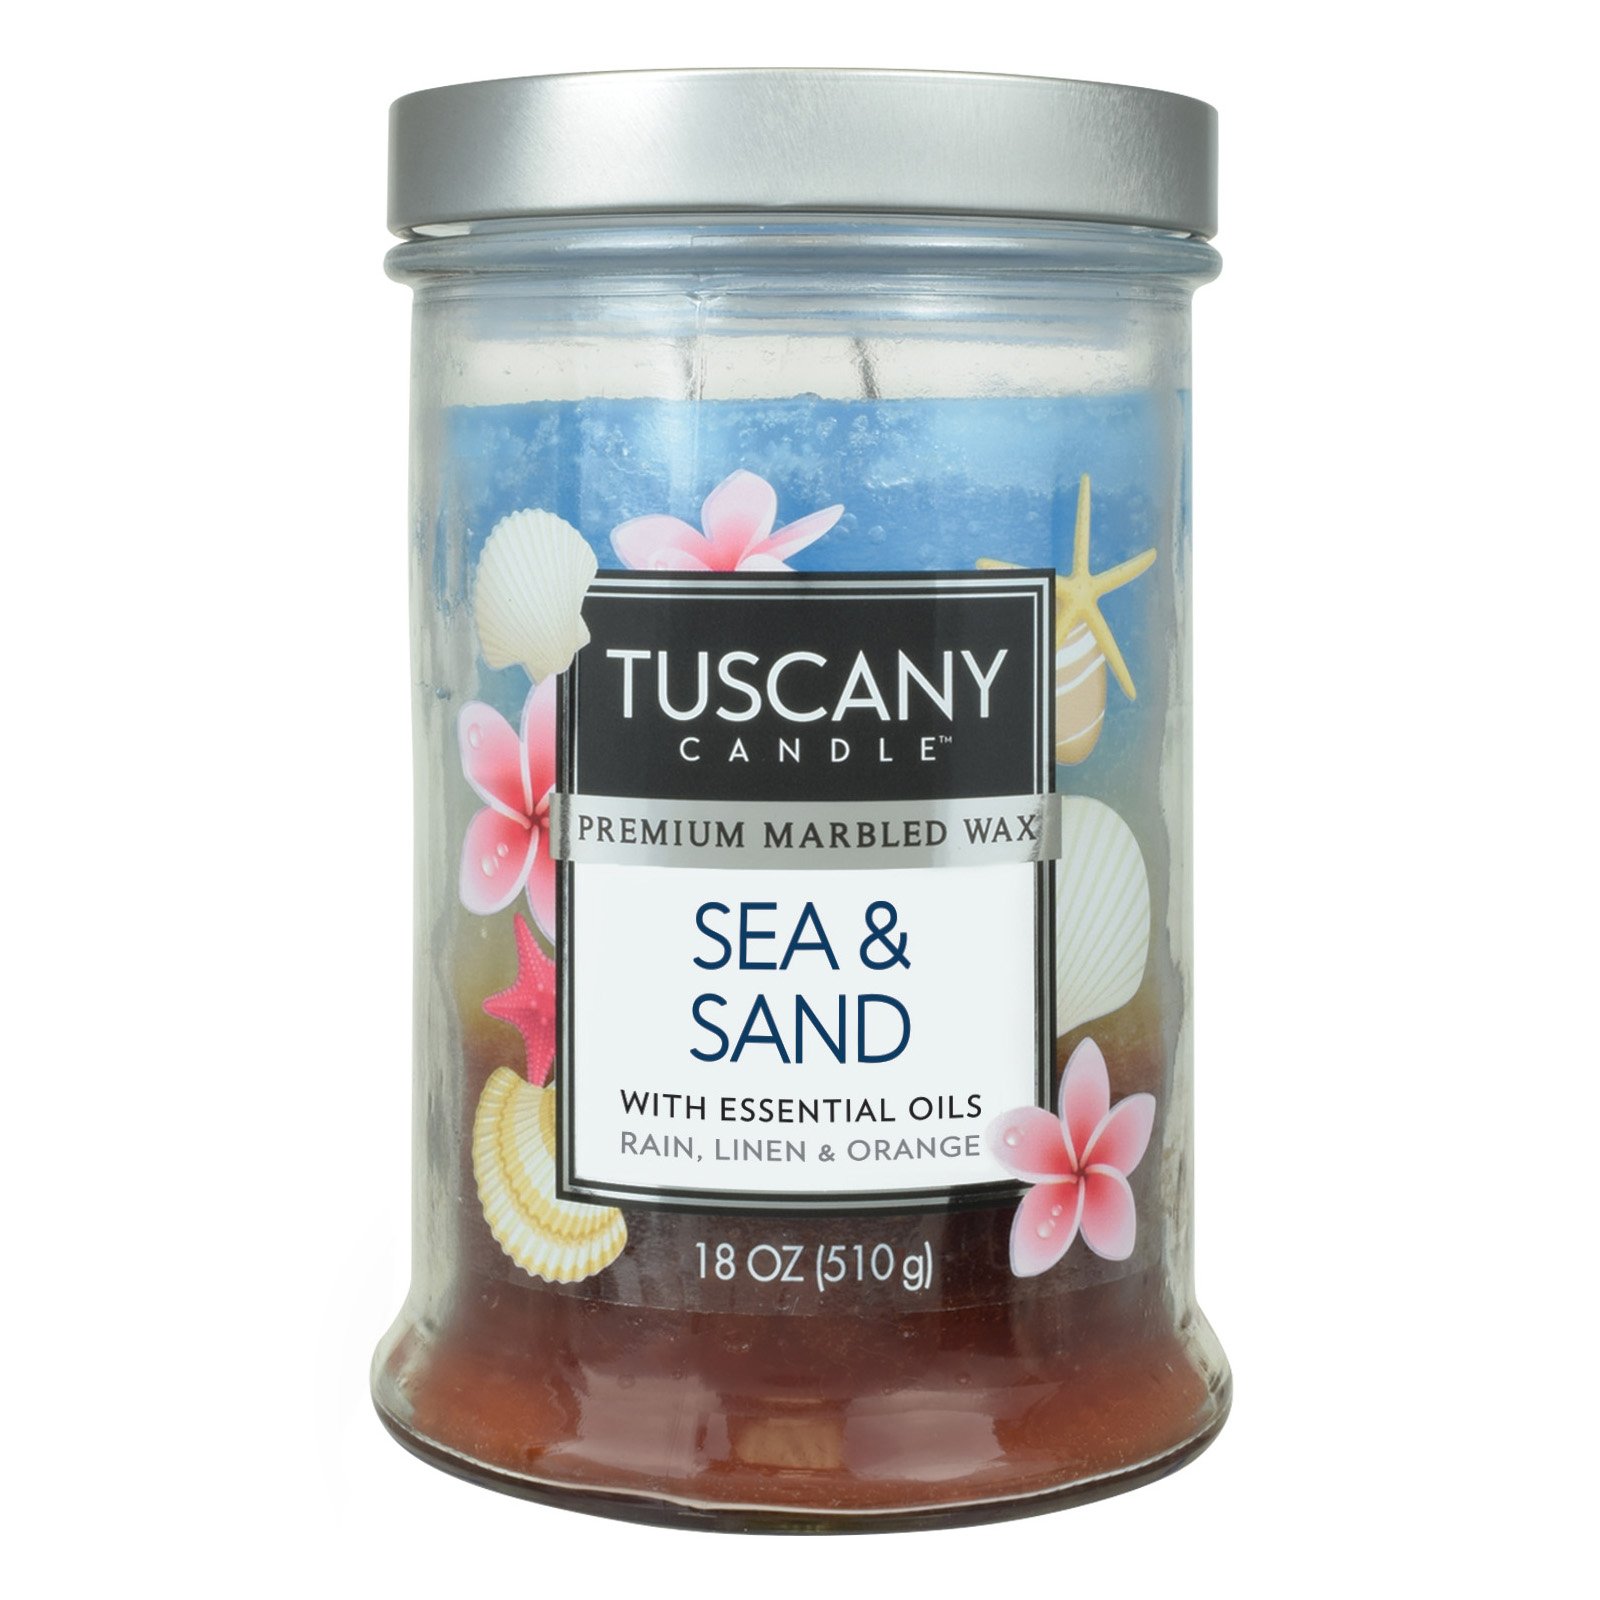 Tuscany Candle Sea & Sand Scented Candle with Essential